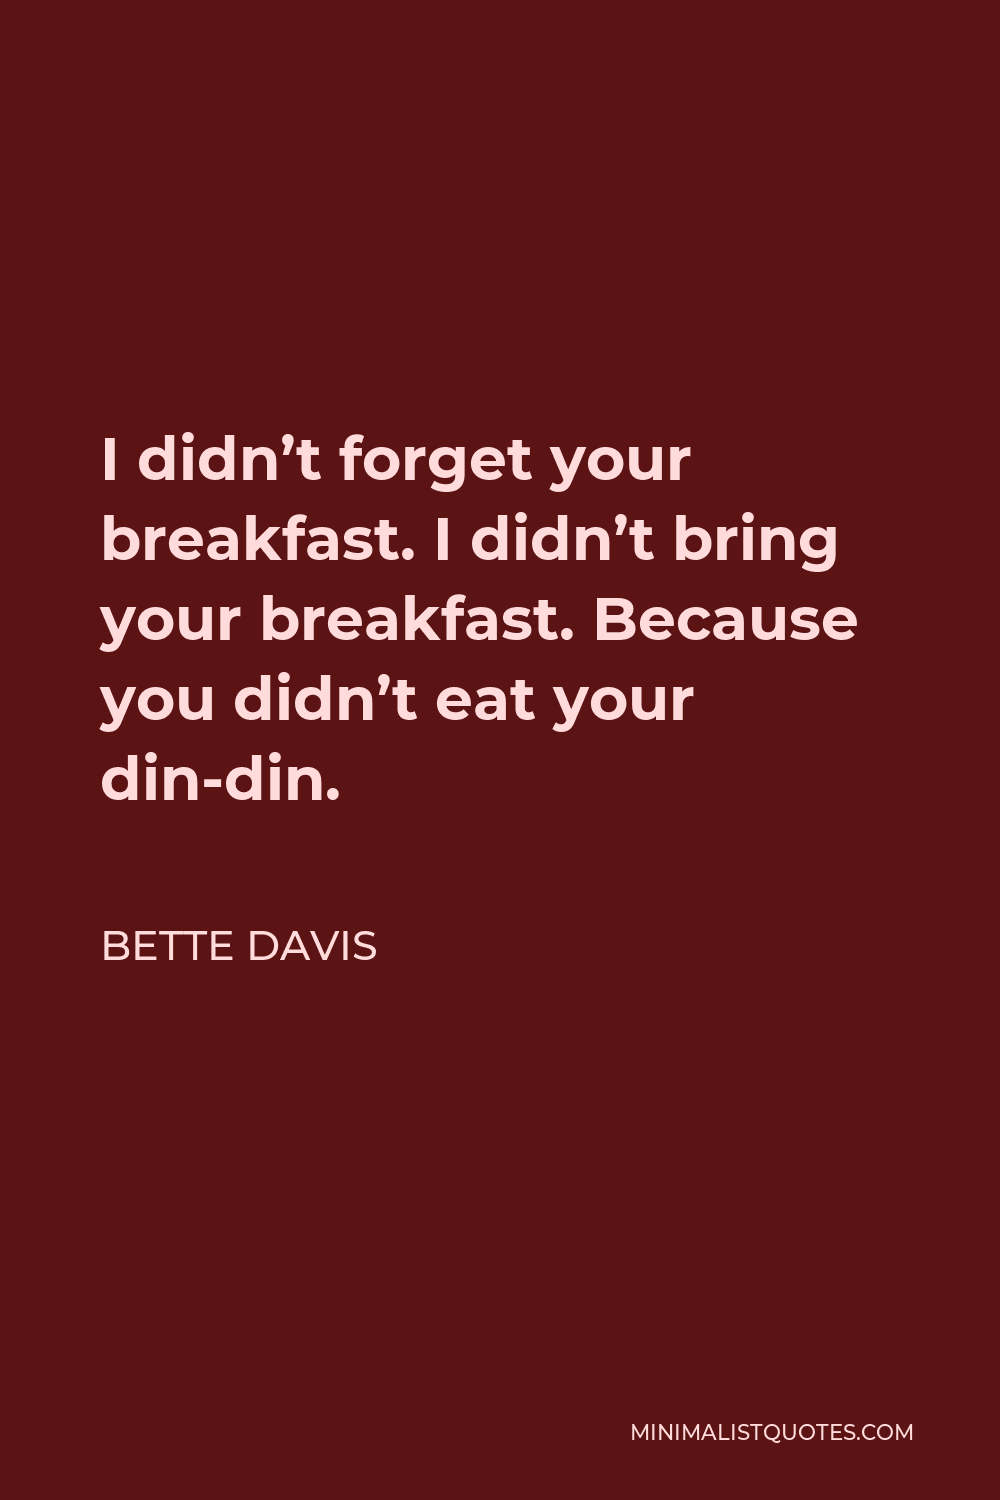 Bette Davis Quote - I didn’t forget your breakfast. I didn’t bring your breakfast. Because you didn’t eat your din-din.